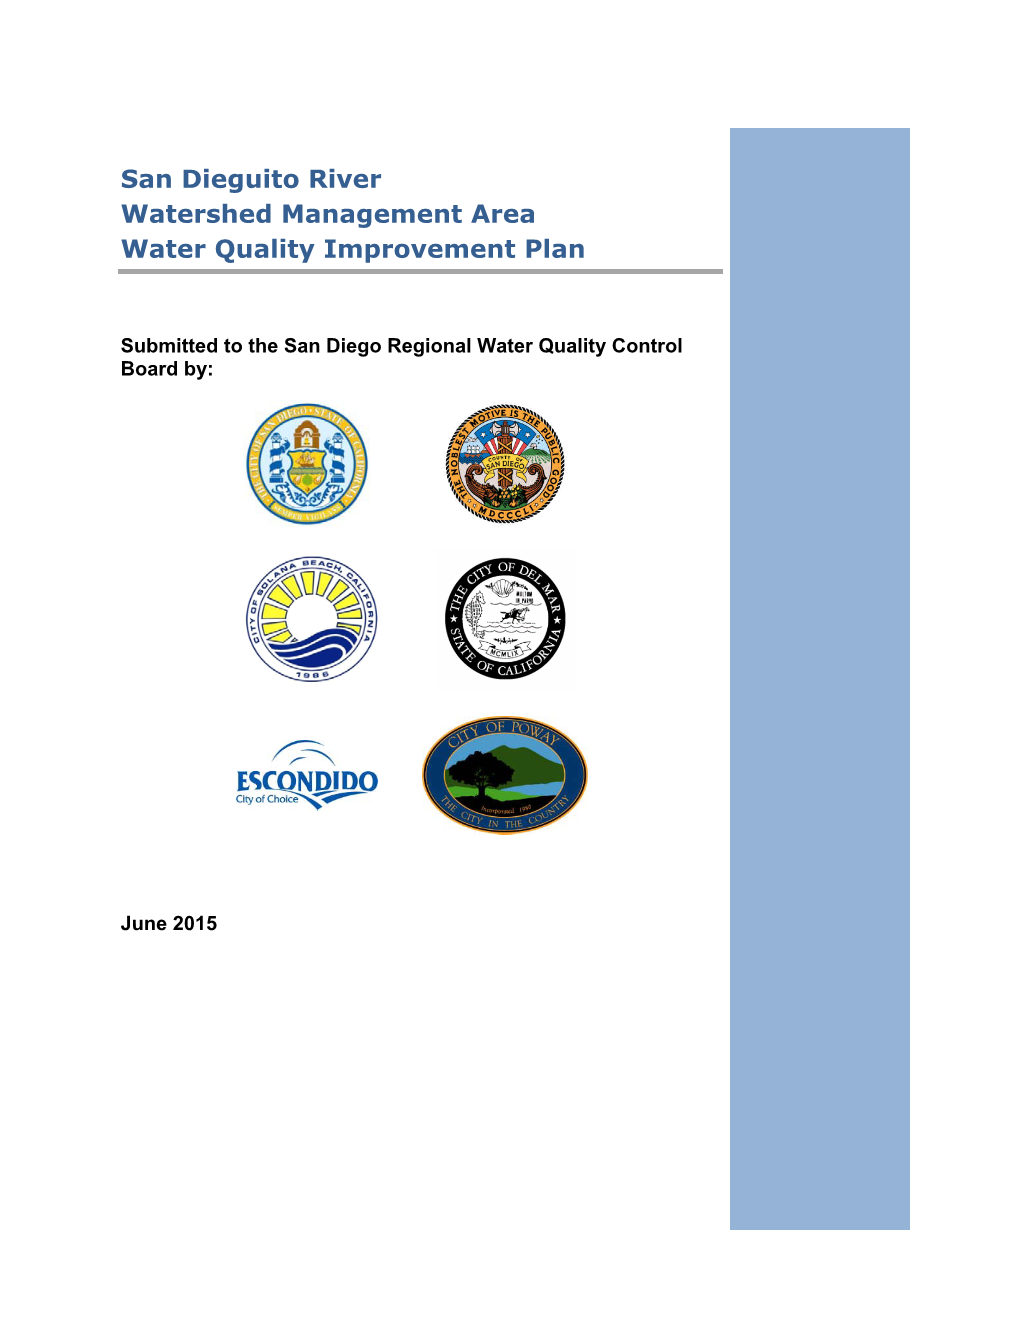 San Dieguito River Watershed Management Area Water Quality Improvement Plan